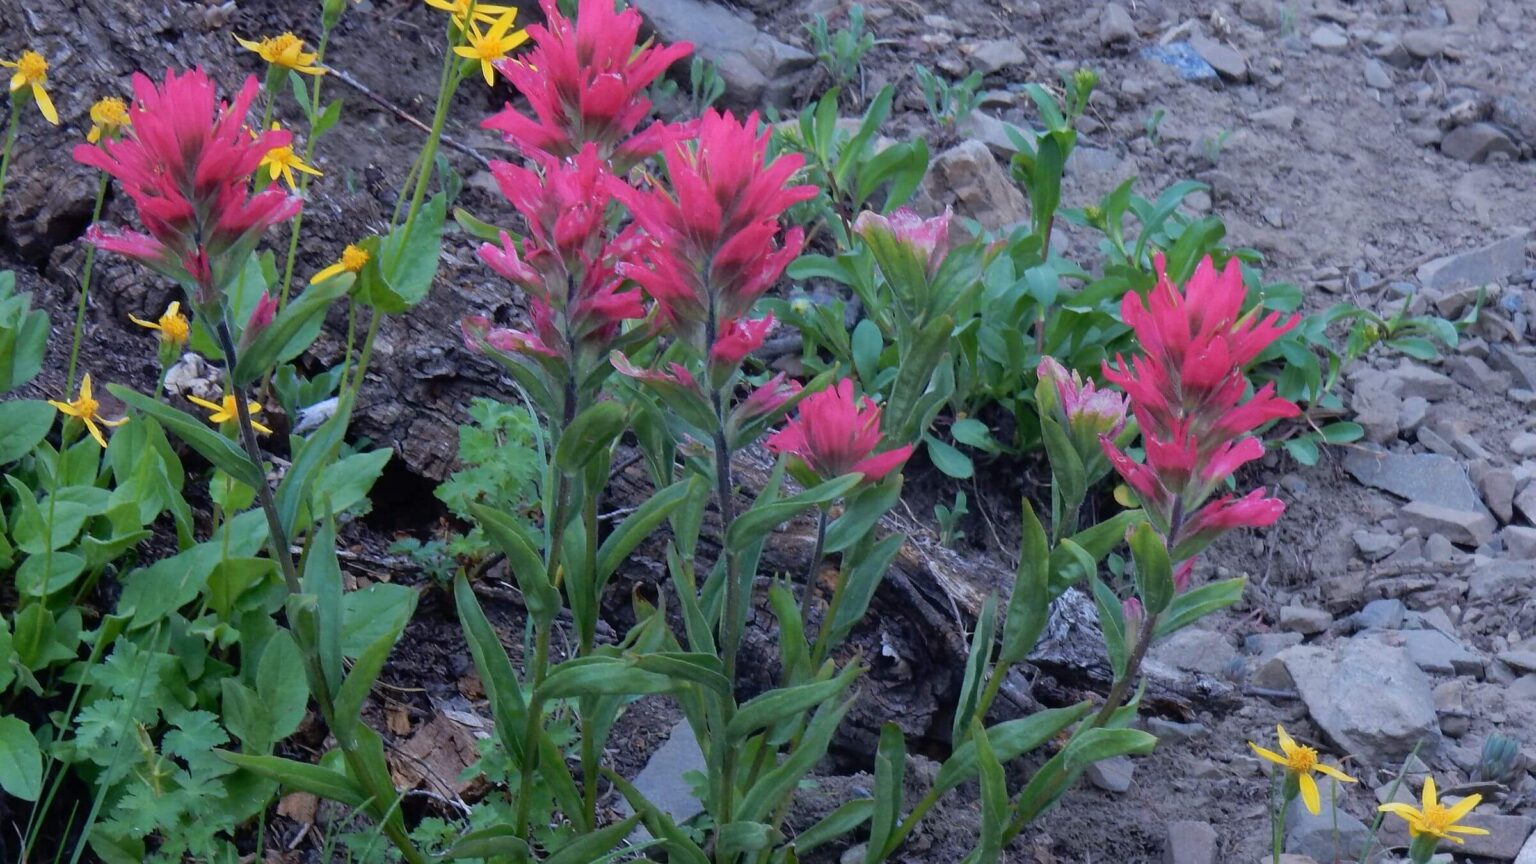 Cecil D. Andrus-White Clouds Wilderness, Indian paintbrush & arnica, July